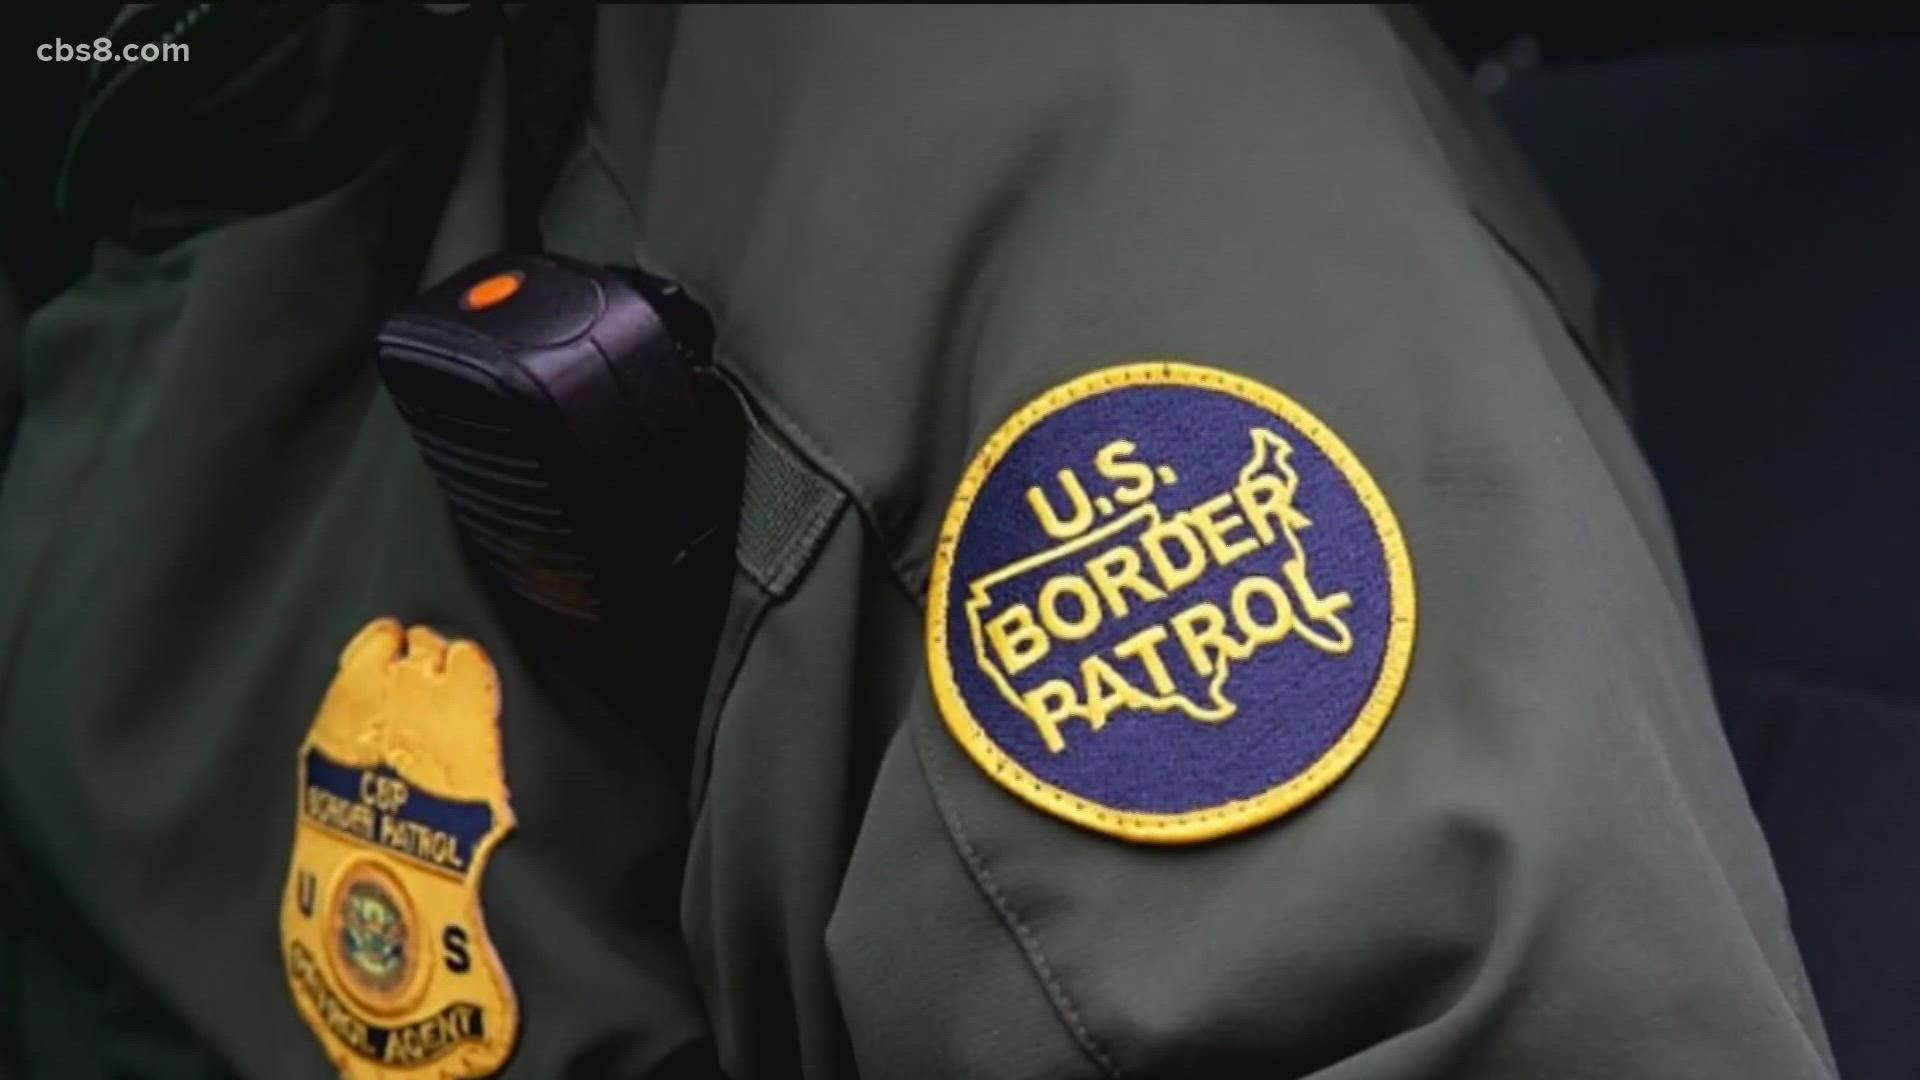 These "critical incident teams," according to the Southern Border Communities Coalition, tamper with evidence and cover up wrong-doing by border patrol agents.